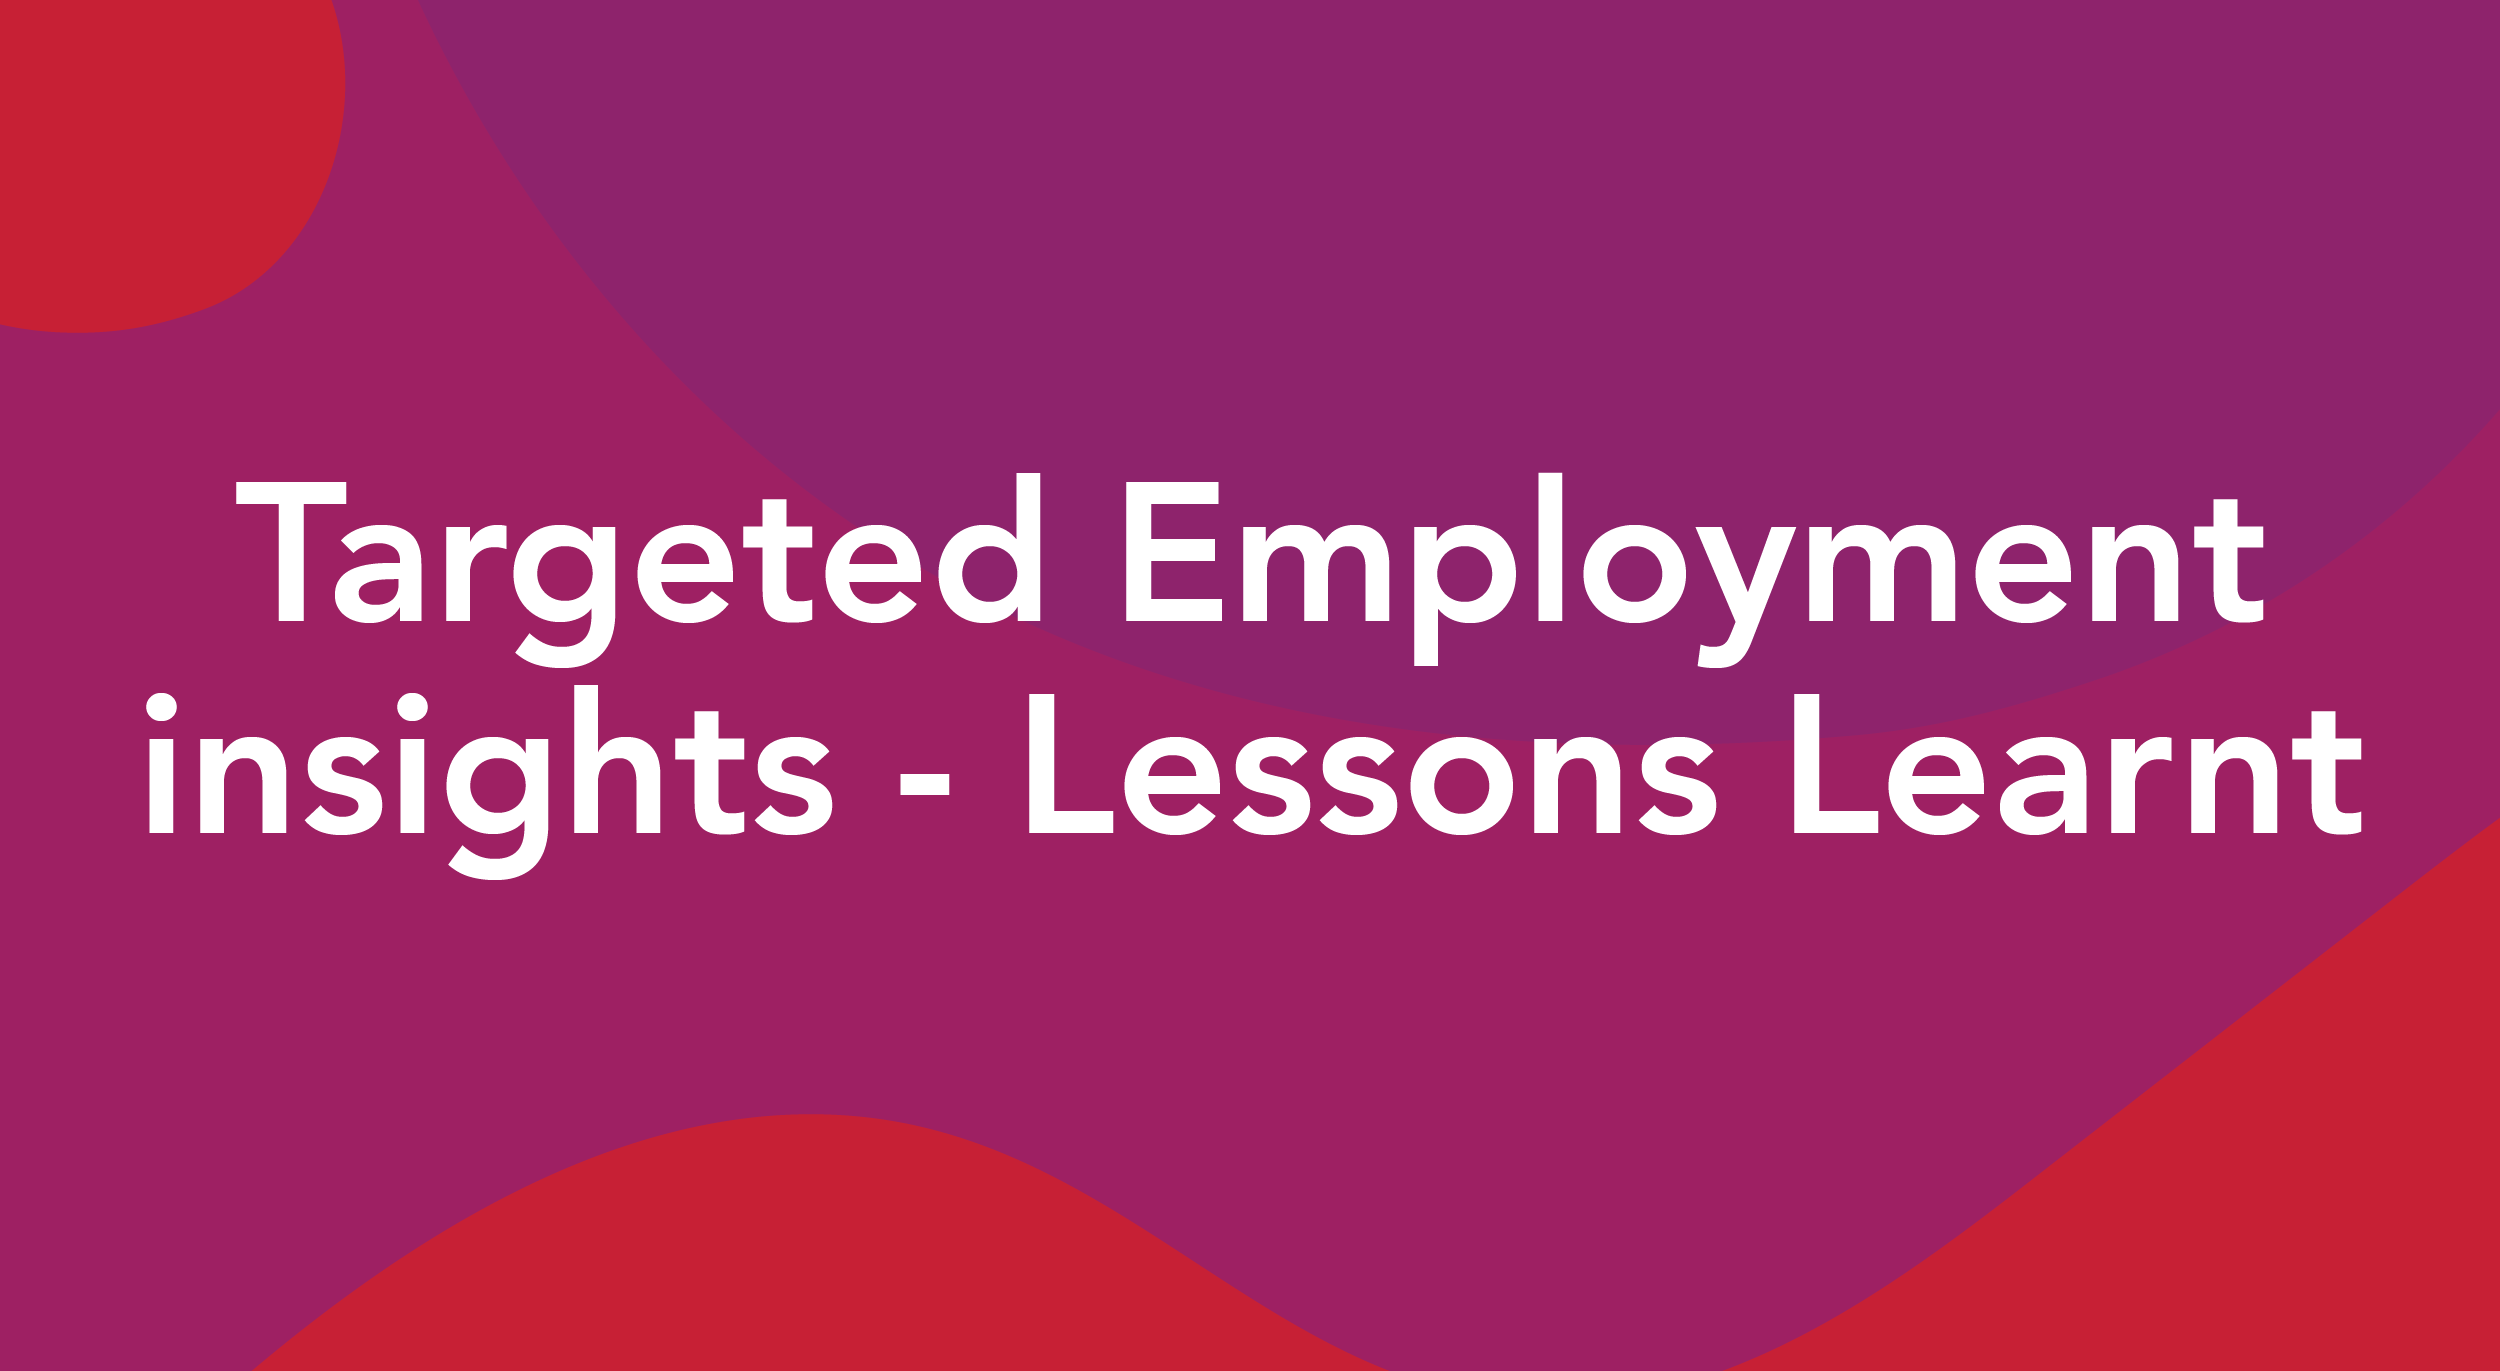 Targeted Employment insights - Lessons Learnt